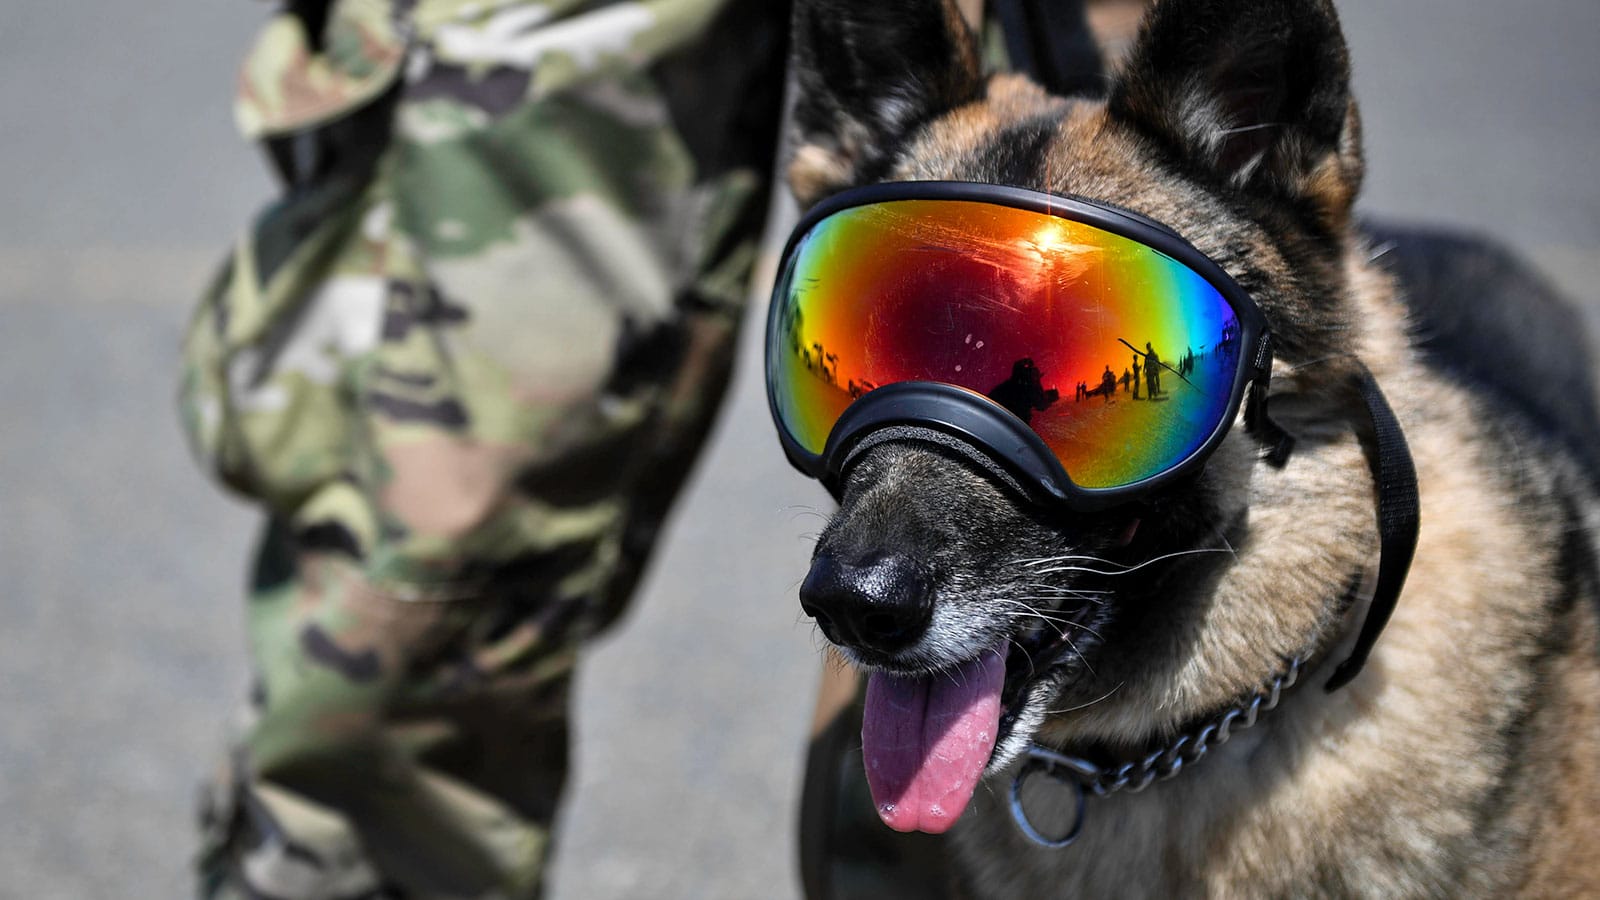 Dogs play an important role in the Military